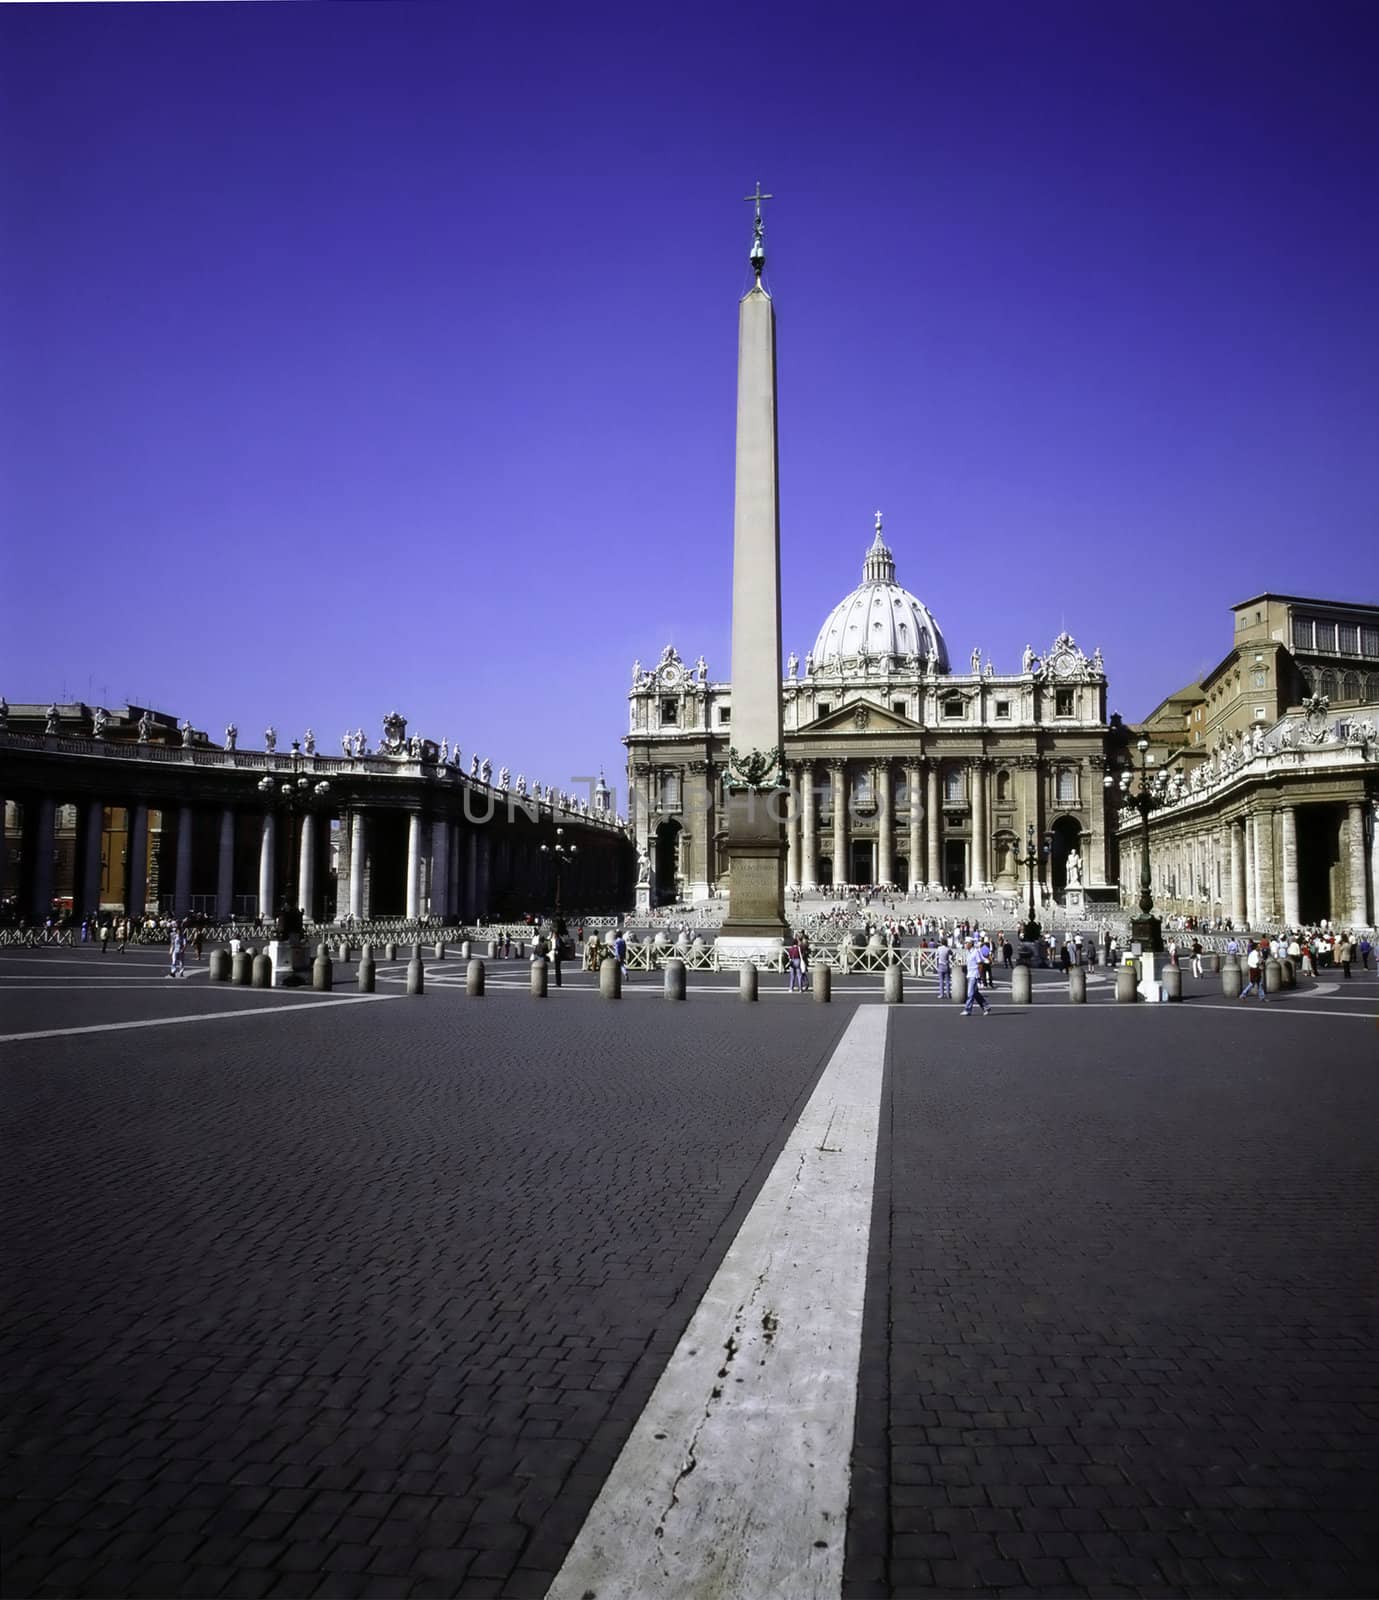 St.Peter's Basilica, Rome by jol66